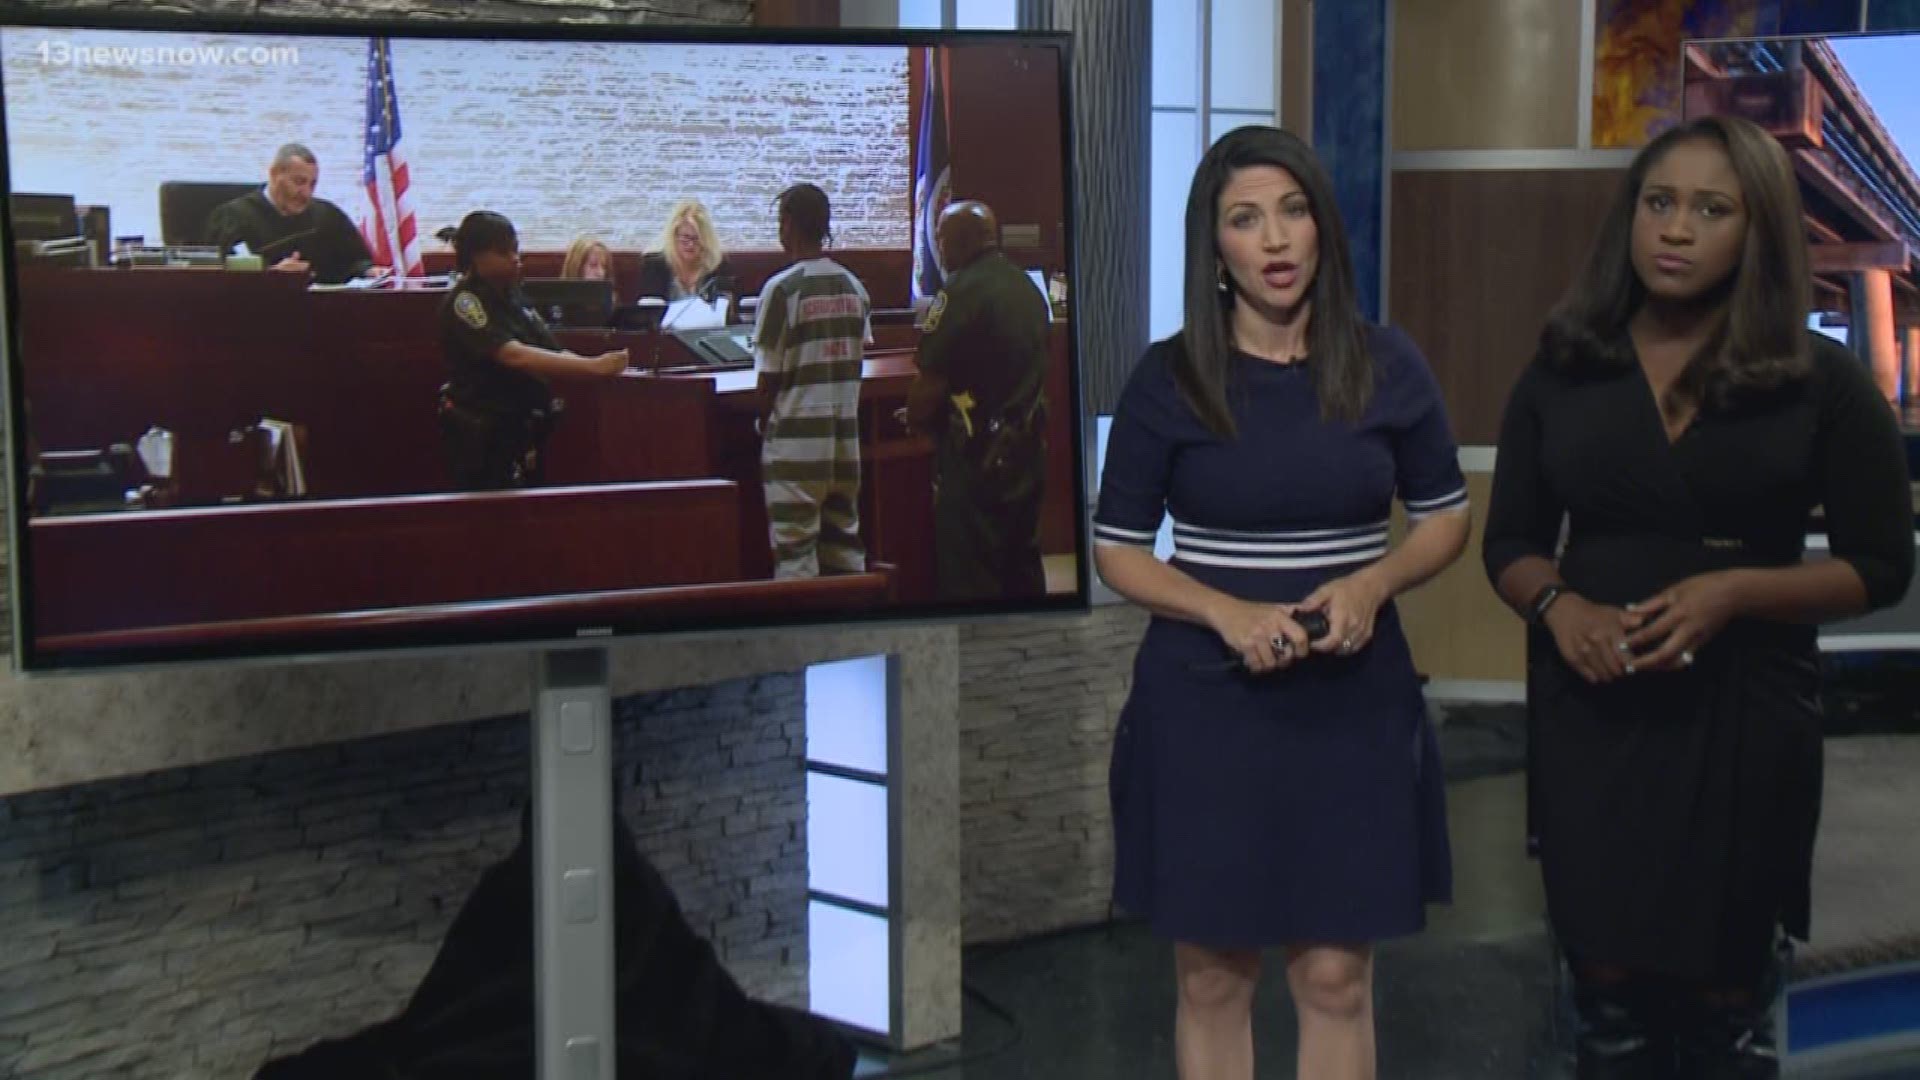 13News Now top headlines at noon with Lucy Bustamante and Ashley Smith for June 18.